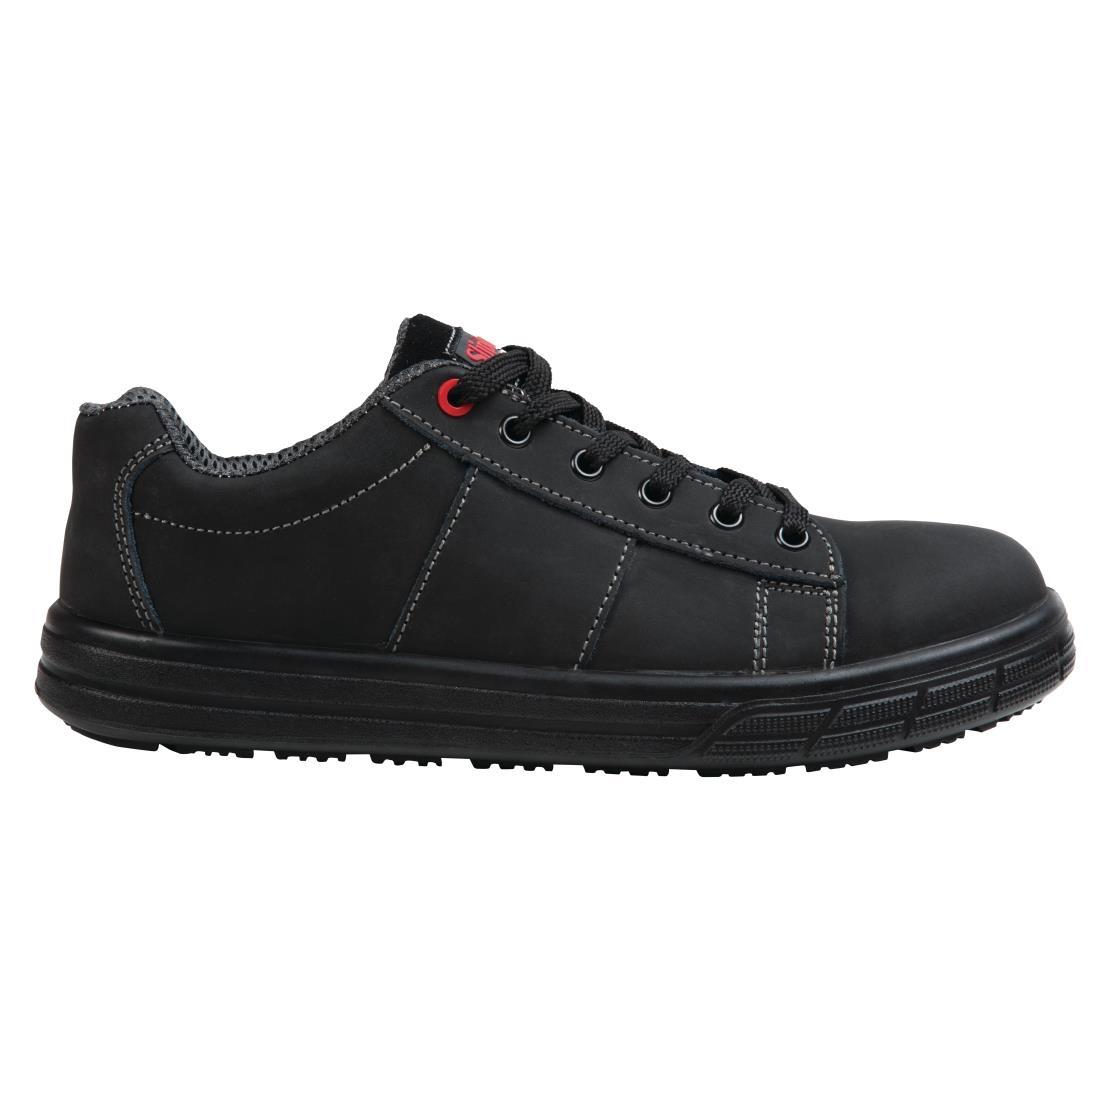 Slipbuster Safety Trainers Black 40 - BB420-40  - 5